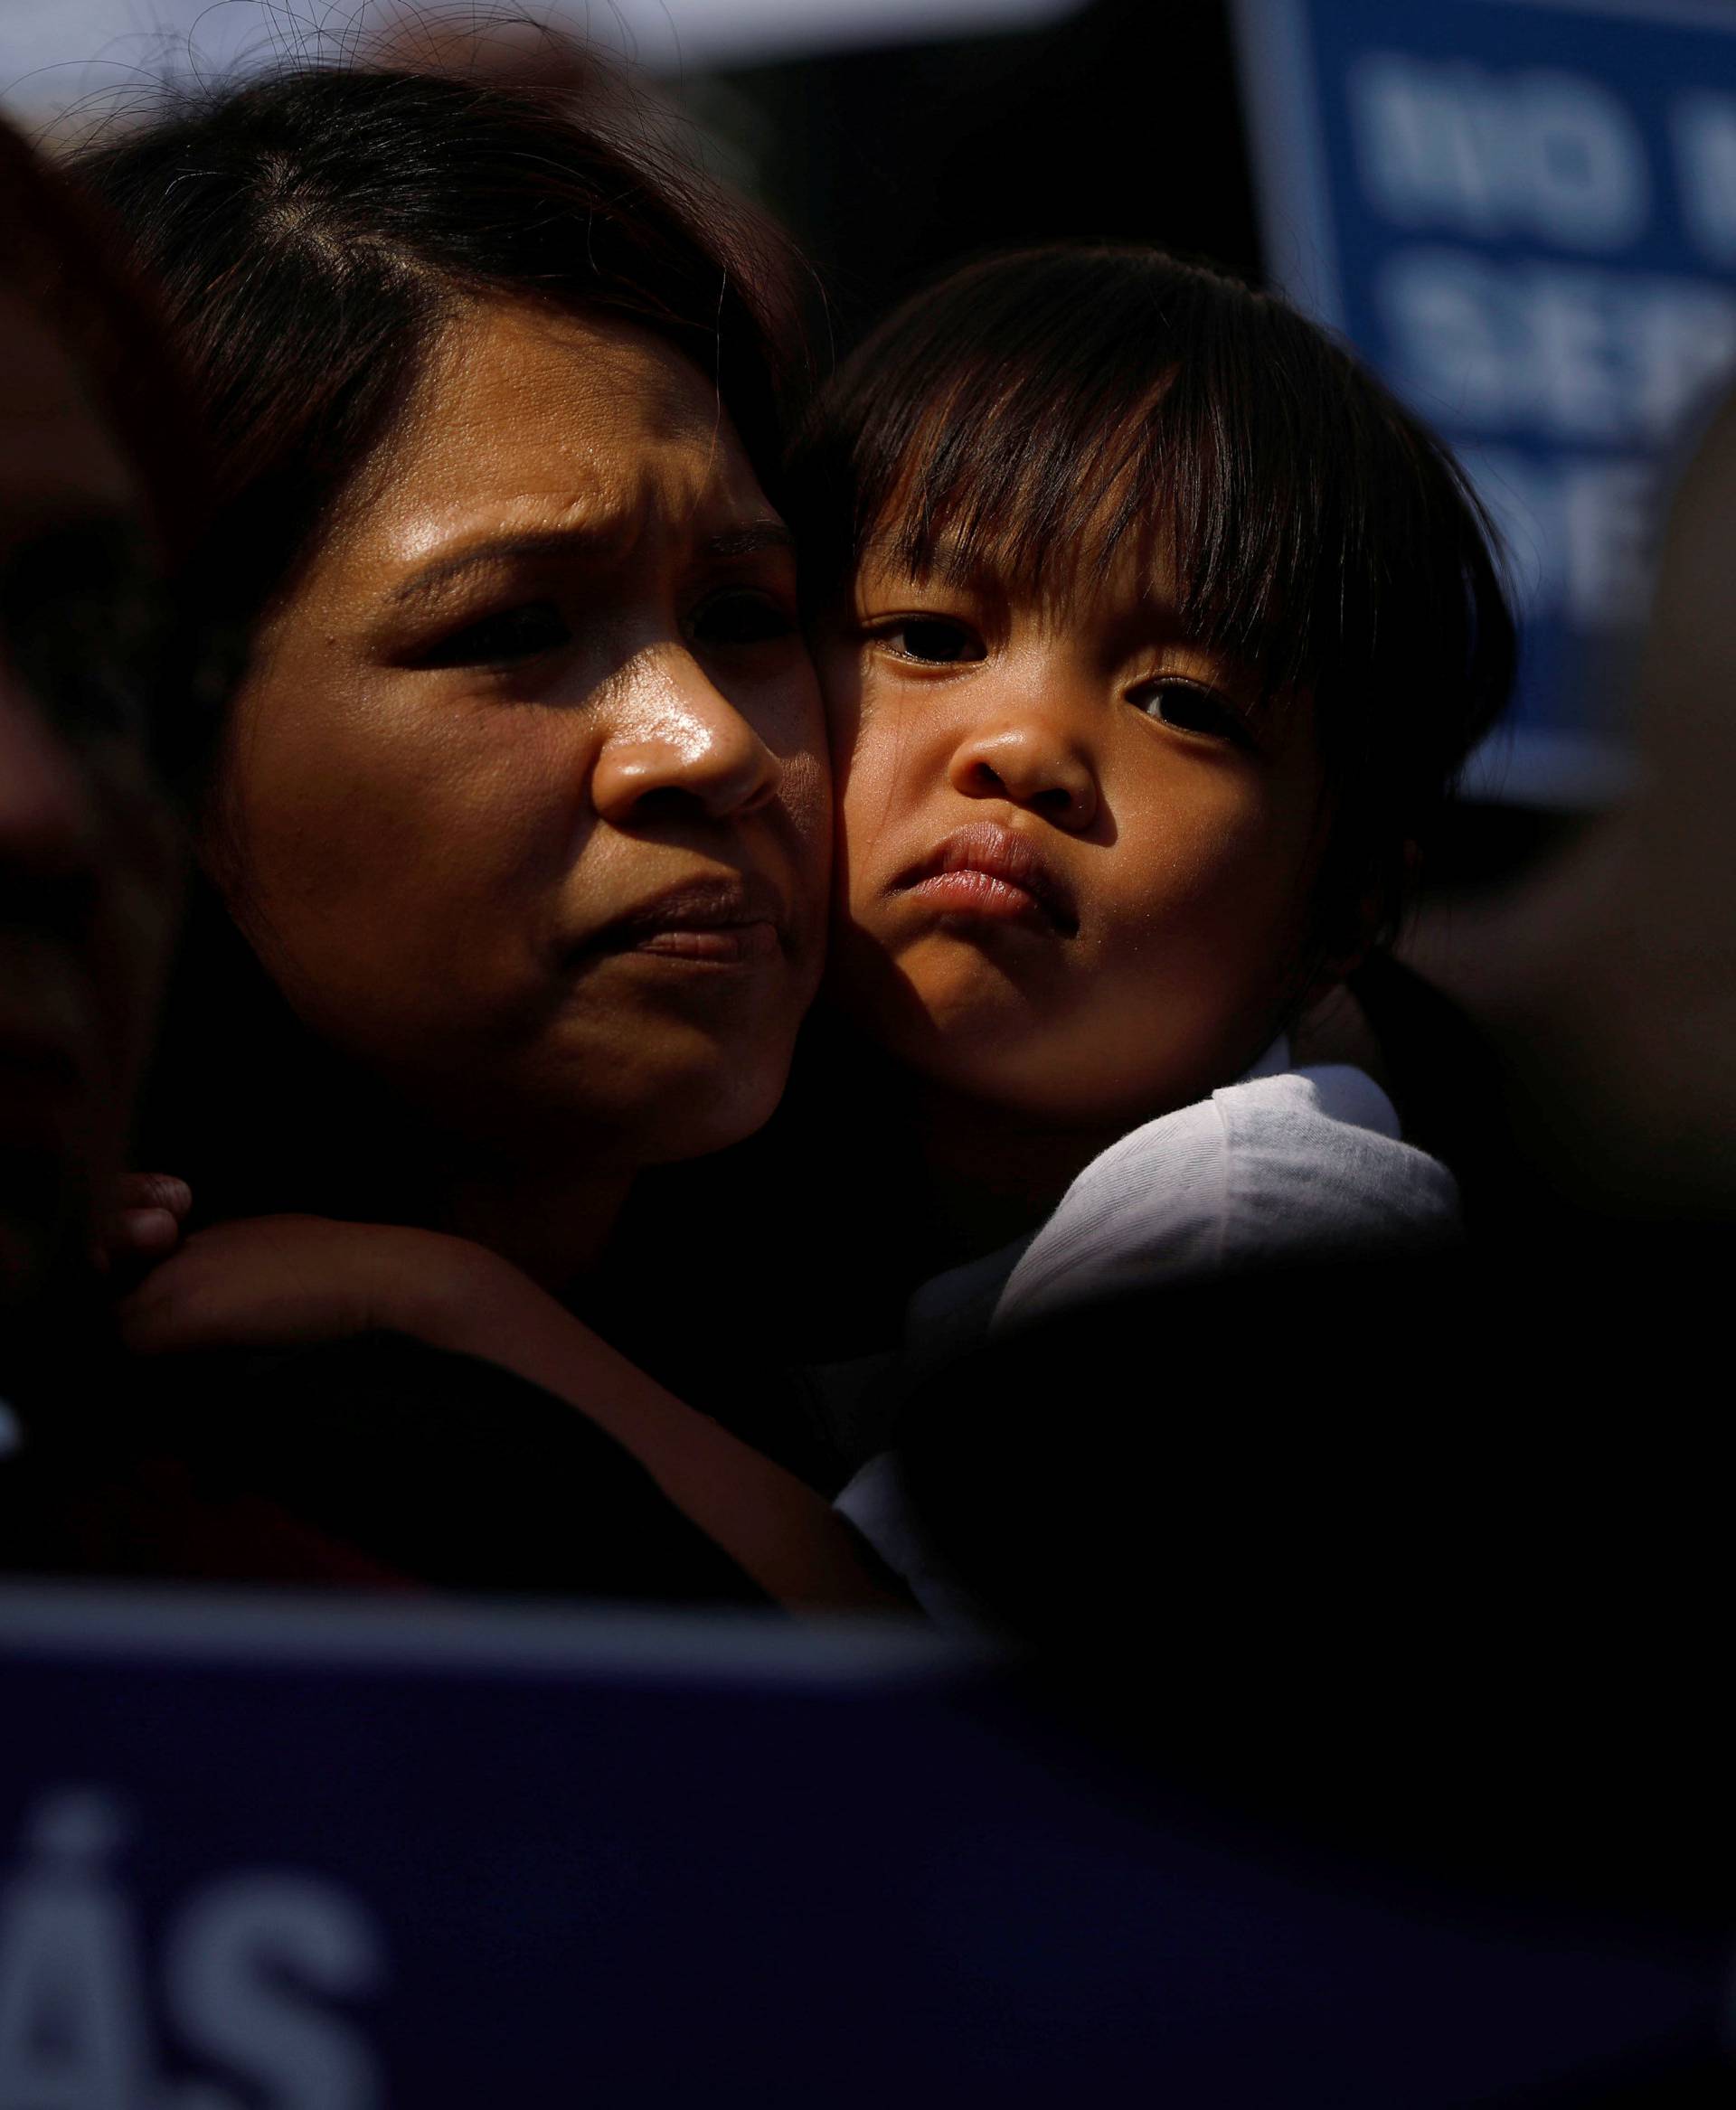 A child embraces a woman as demonstrators hold signs against the Trump administration policy of separating migrant children from their parents at the border during a demonstration outside of City Hall in Los Angeles